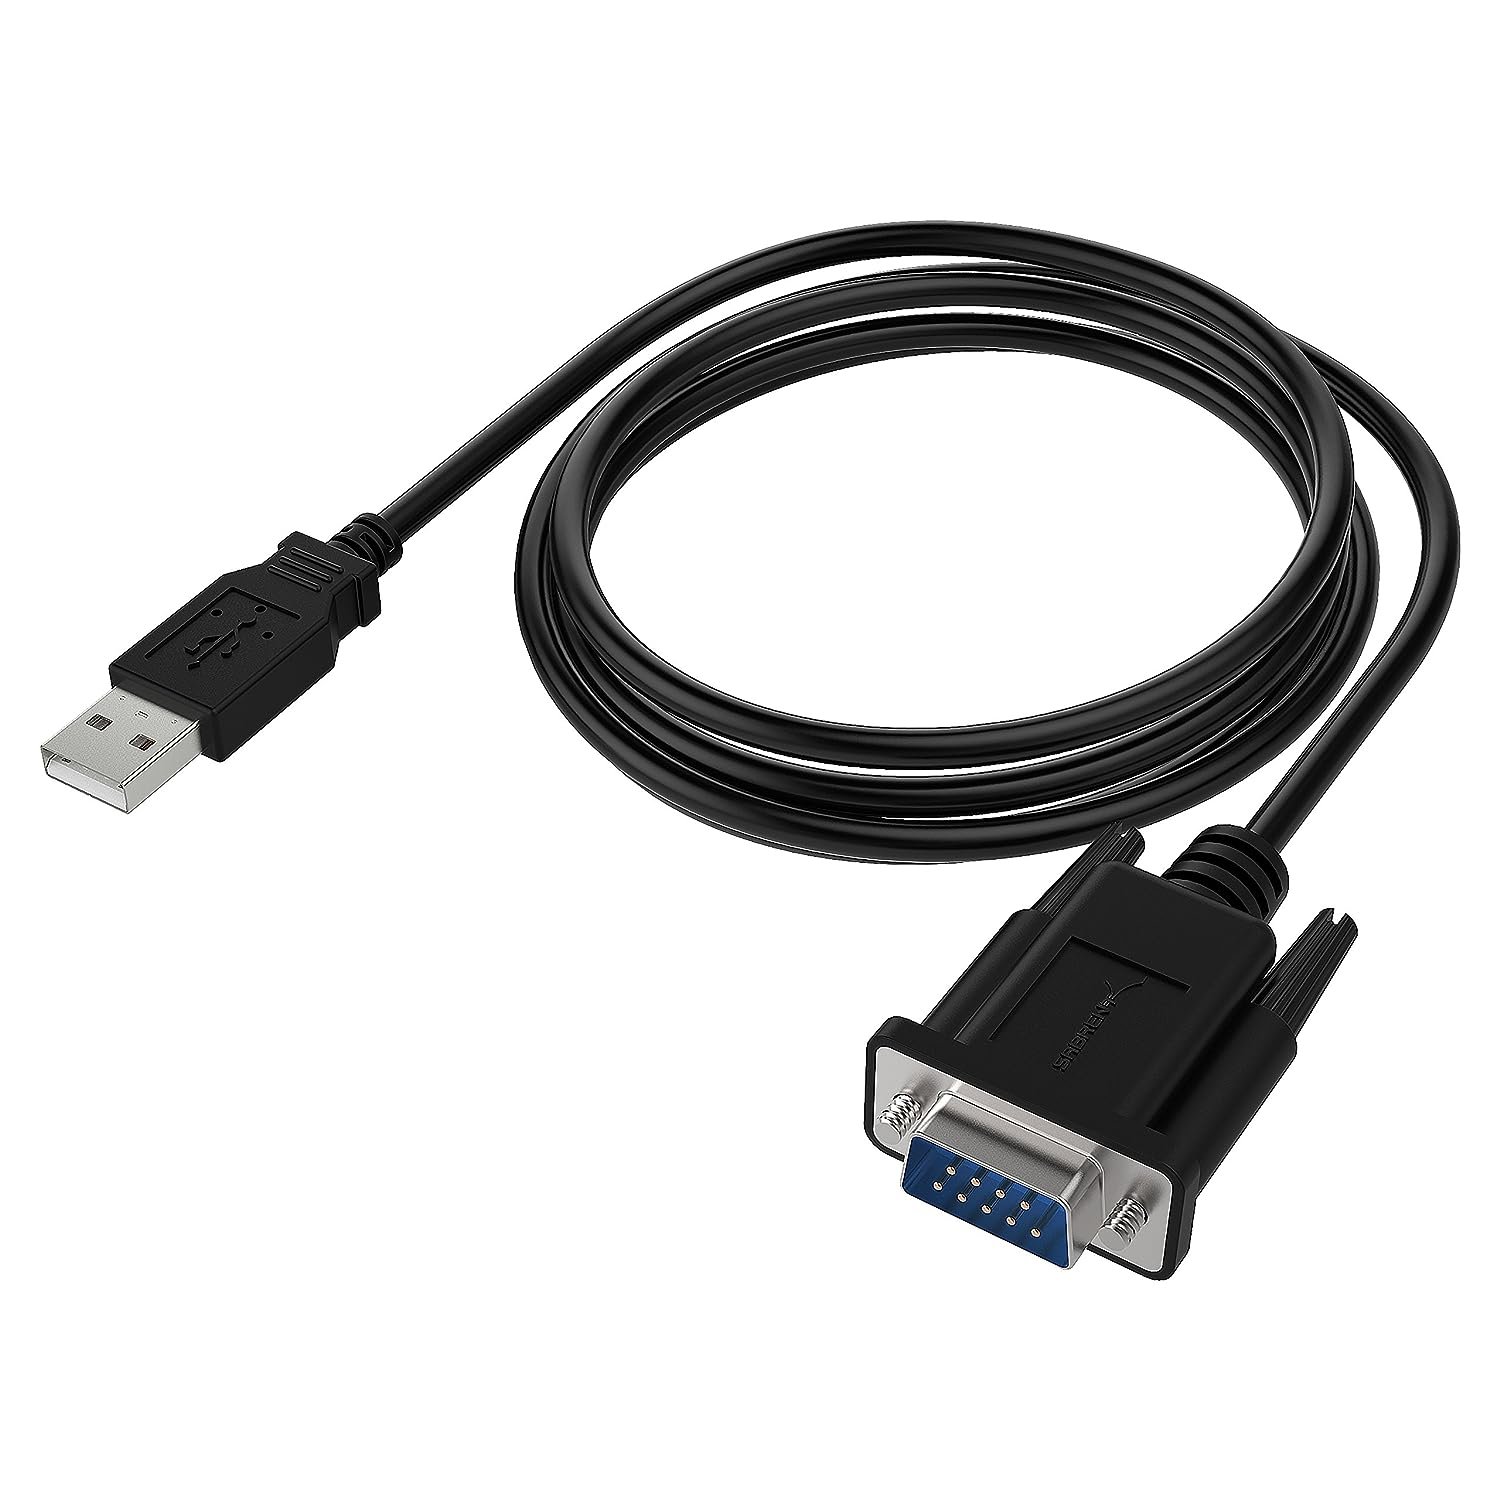 SABRENT USB 2.0 to Serial (9-Pin) DB-9 RS-232 Adapter Cable 6ft Cable [FTDI Chipset] (CB-FTDI)